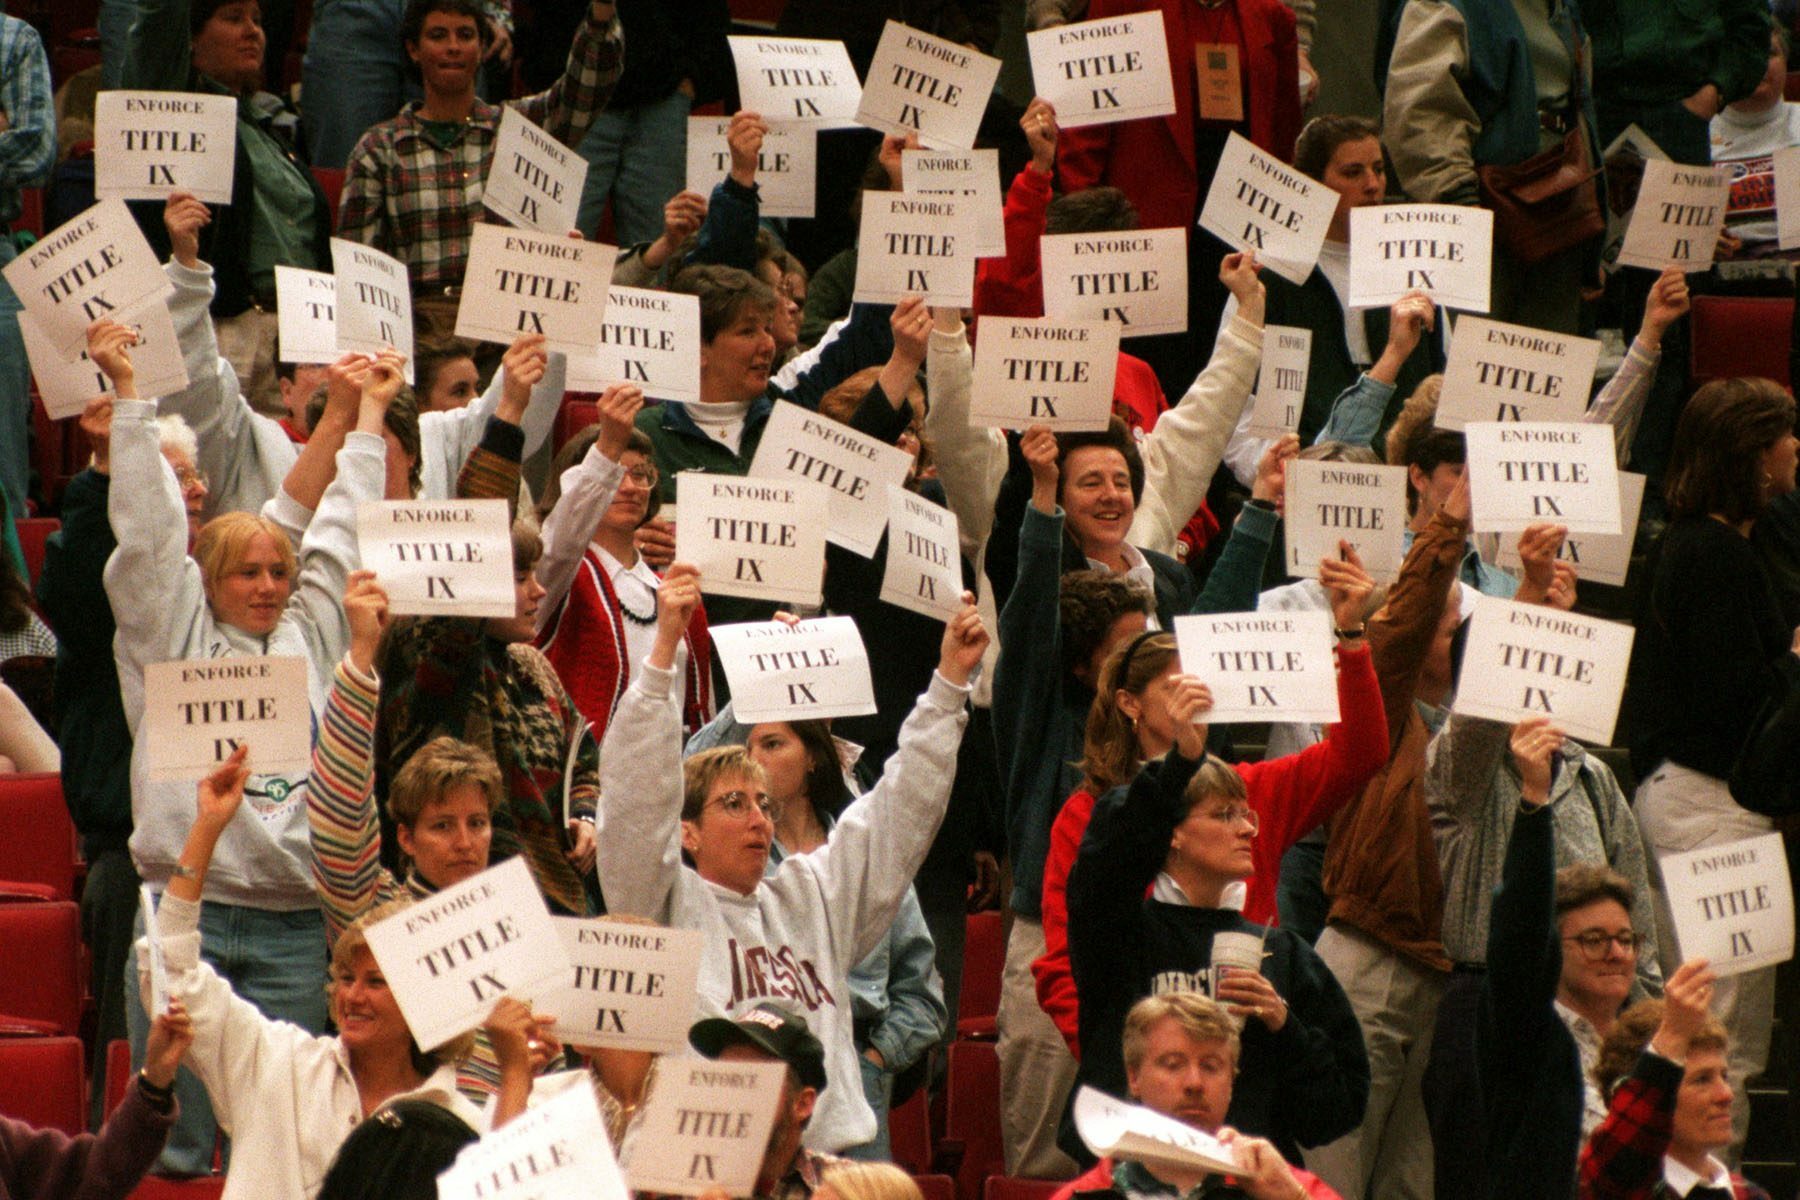 Members and supporters of the Women's Basketball Coaches Association demonstrate in support of Title IX by holding up printed signs that read 